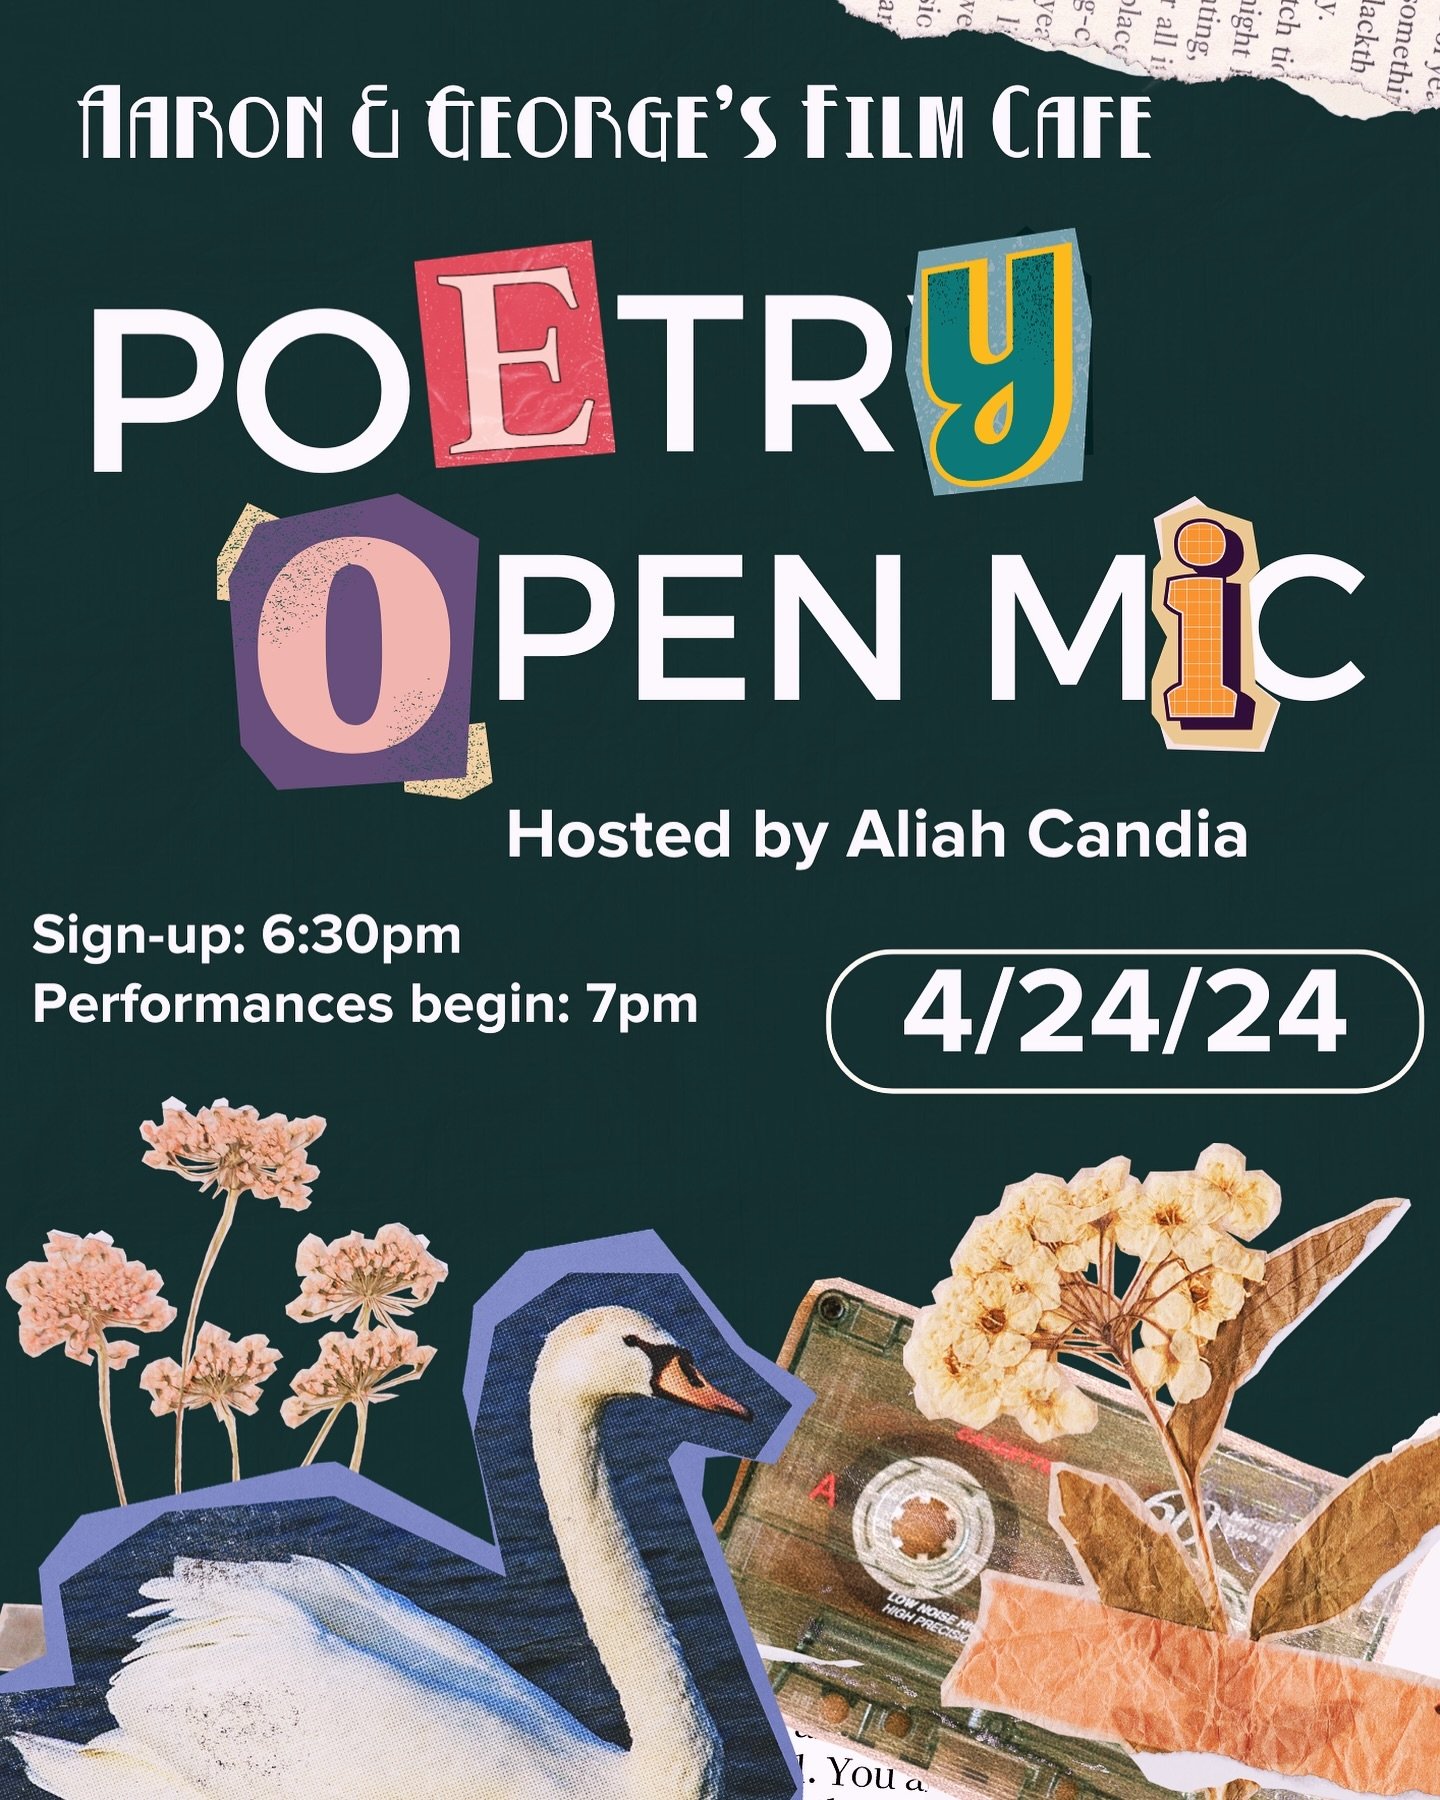 April is National Poetry Month! To celebrate 
@abstractaliah will be hosting Vol. 12 of her Poetry Open Mic Series on April 24. Sign-up starts at 6:30pm and Performances at 7pm. #openmic #downtownelpaso #nationalpoetrymonth